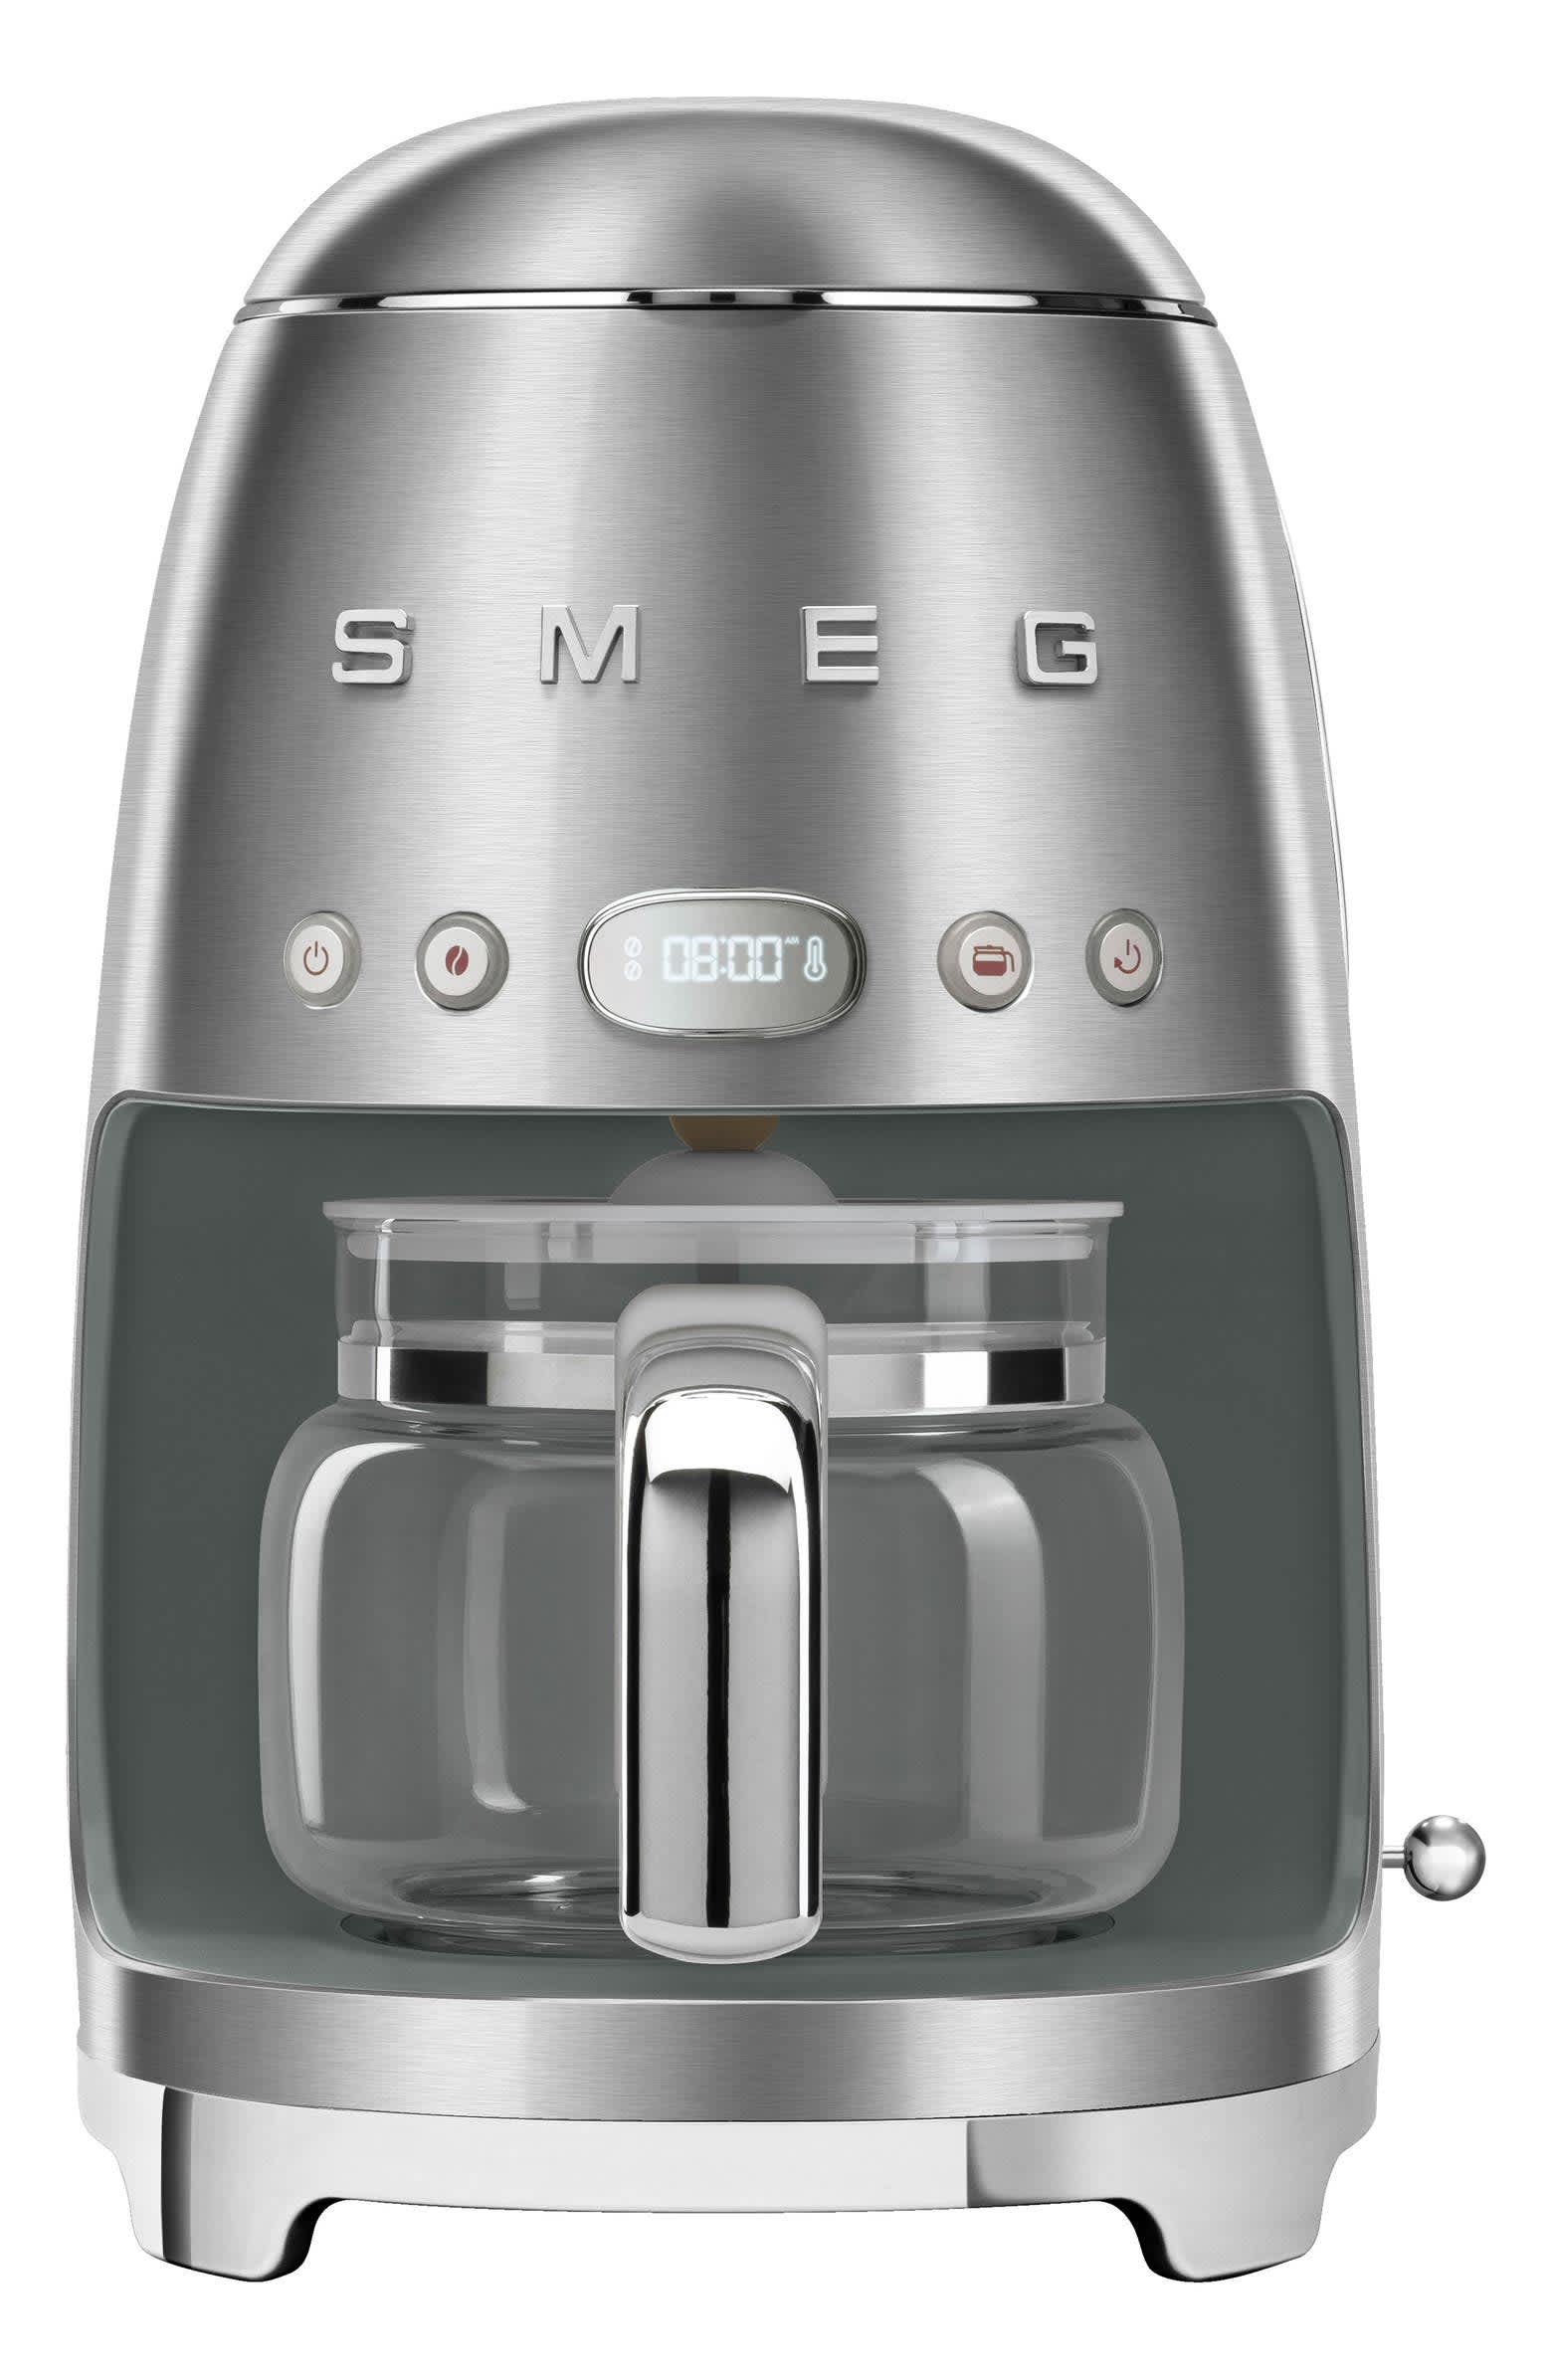 http://cdn.apartmenttherapy.info/image/upload/v1632752937/gen-workflow/product-database/SMEG_50s_Retro_Style_10-Cup_Drip_Coffeemaker_2.jpg